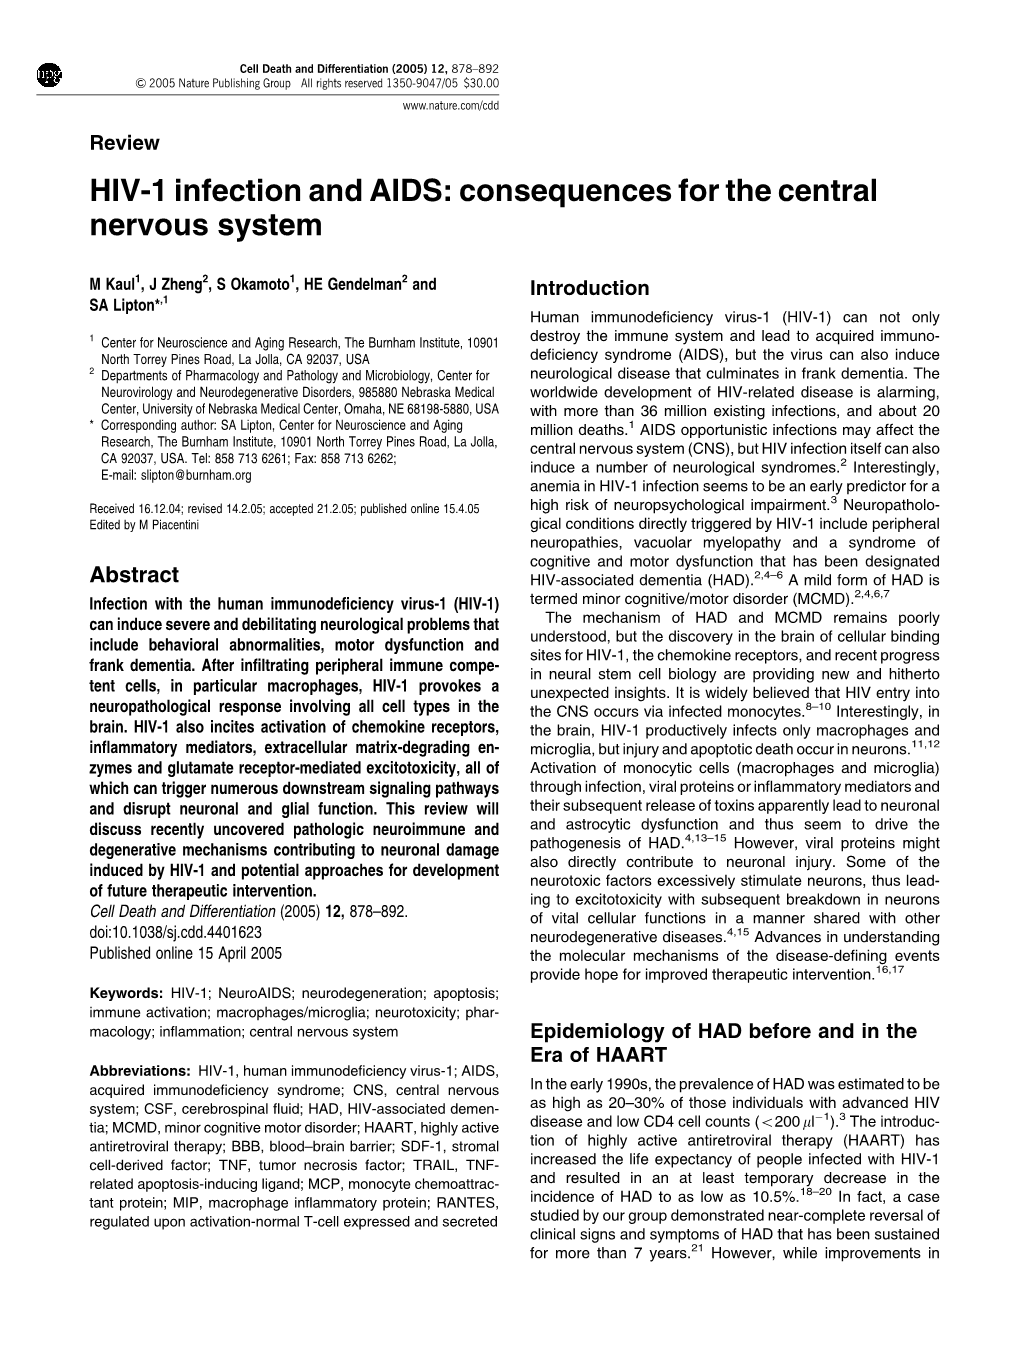 HIV-1 Infection and AIDS: Consequences for the Central Nervous System